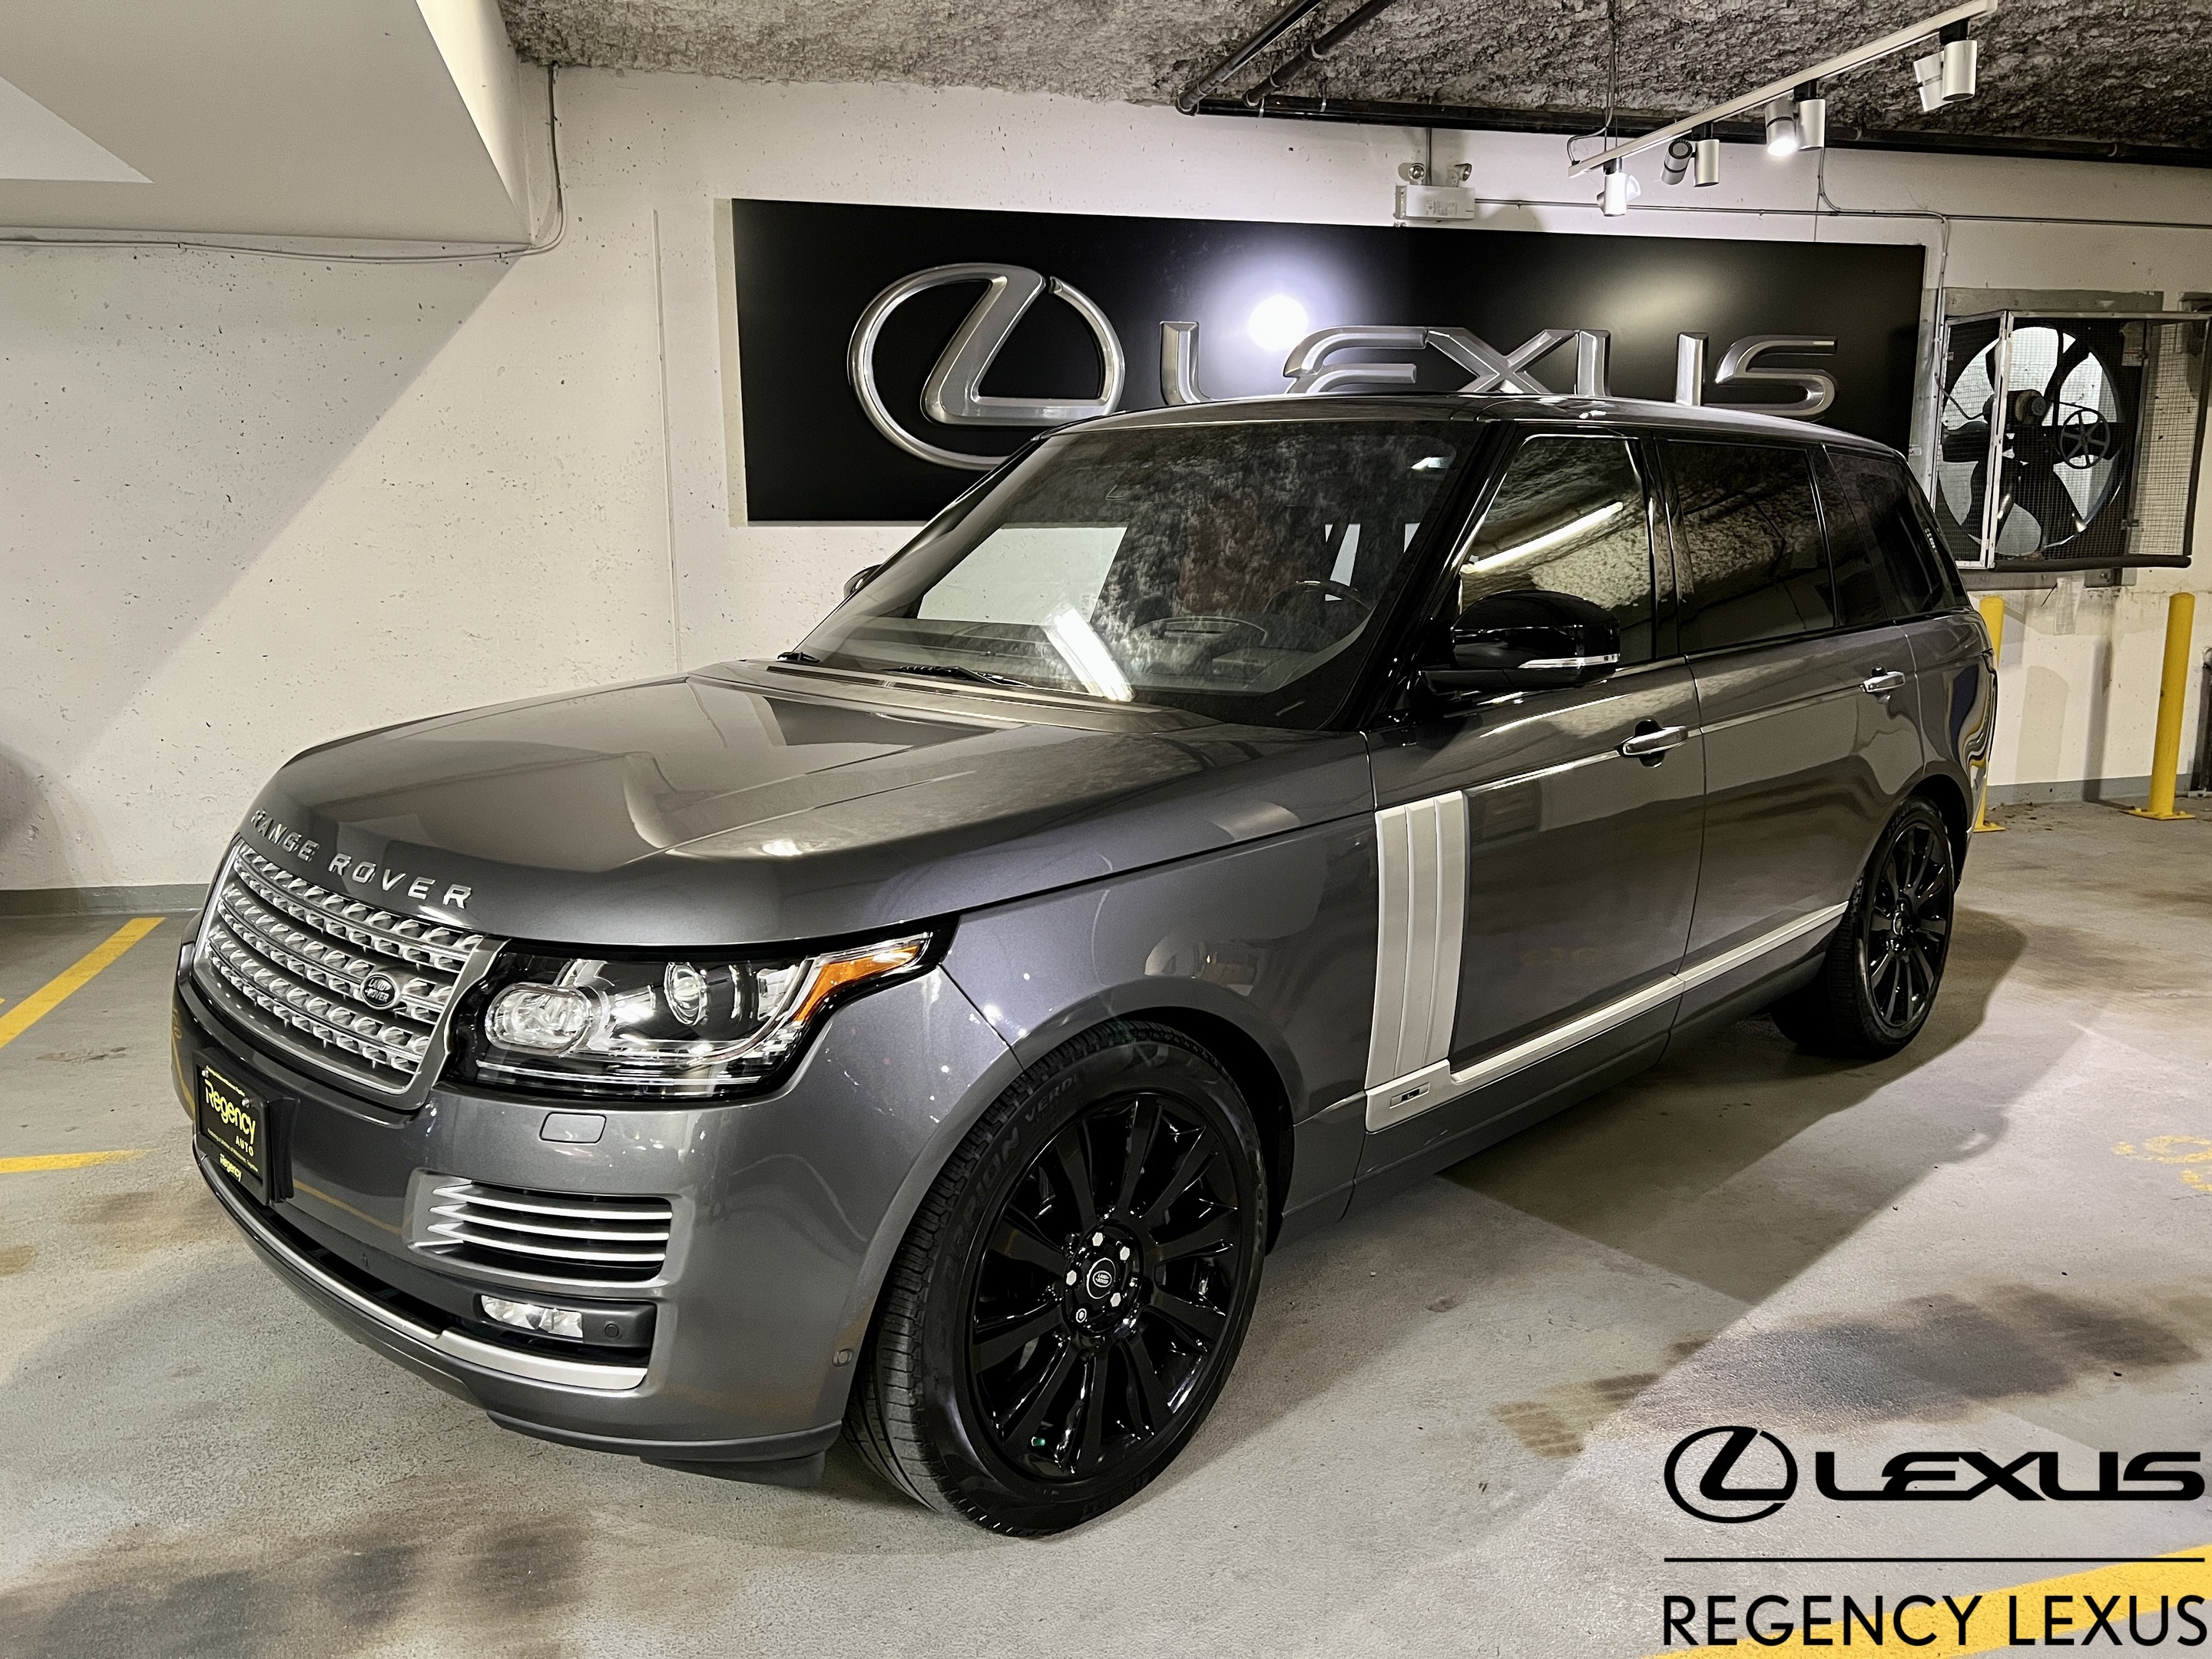 2016 Land Rover Range Rover NO ACCIDENTS LWB AUTOBIOGRPAHY NAV PANROOF 